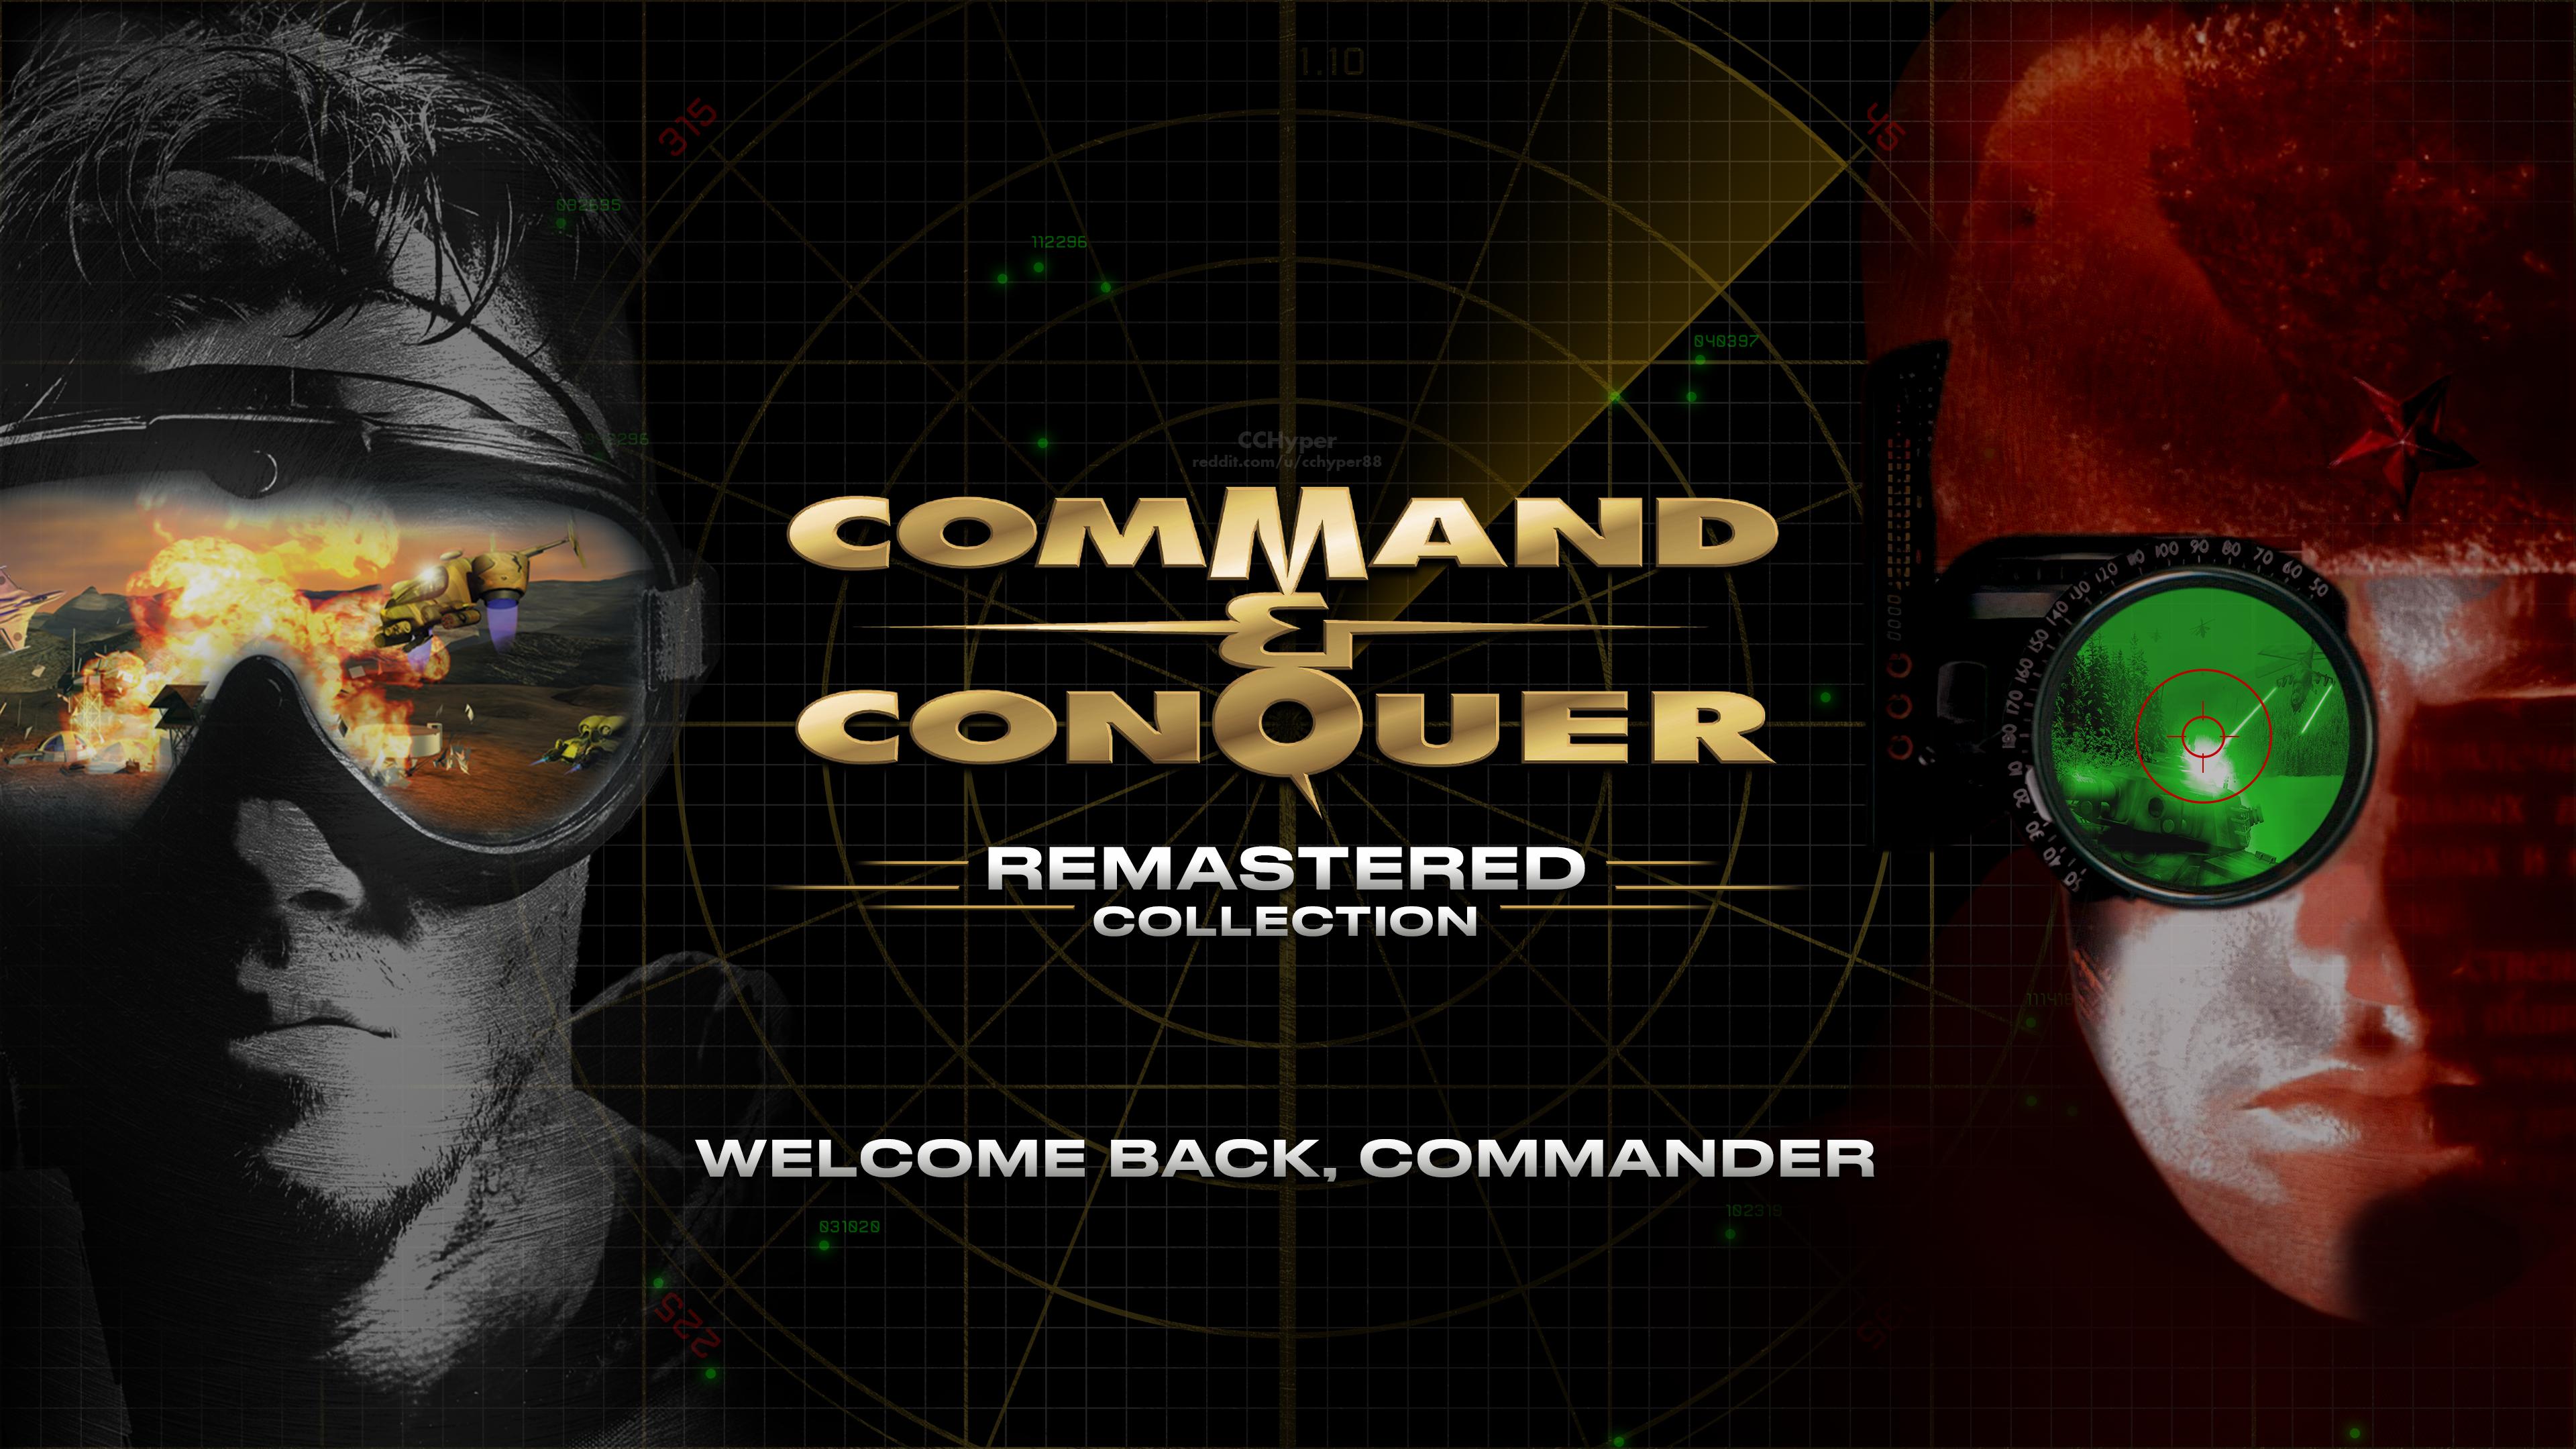 Command and conquer remastered. Command and Conquer 1995 Remaster. Command Conquer Remastered collection 2020. Command & Conquer Remastered collection.